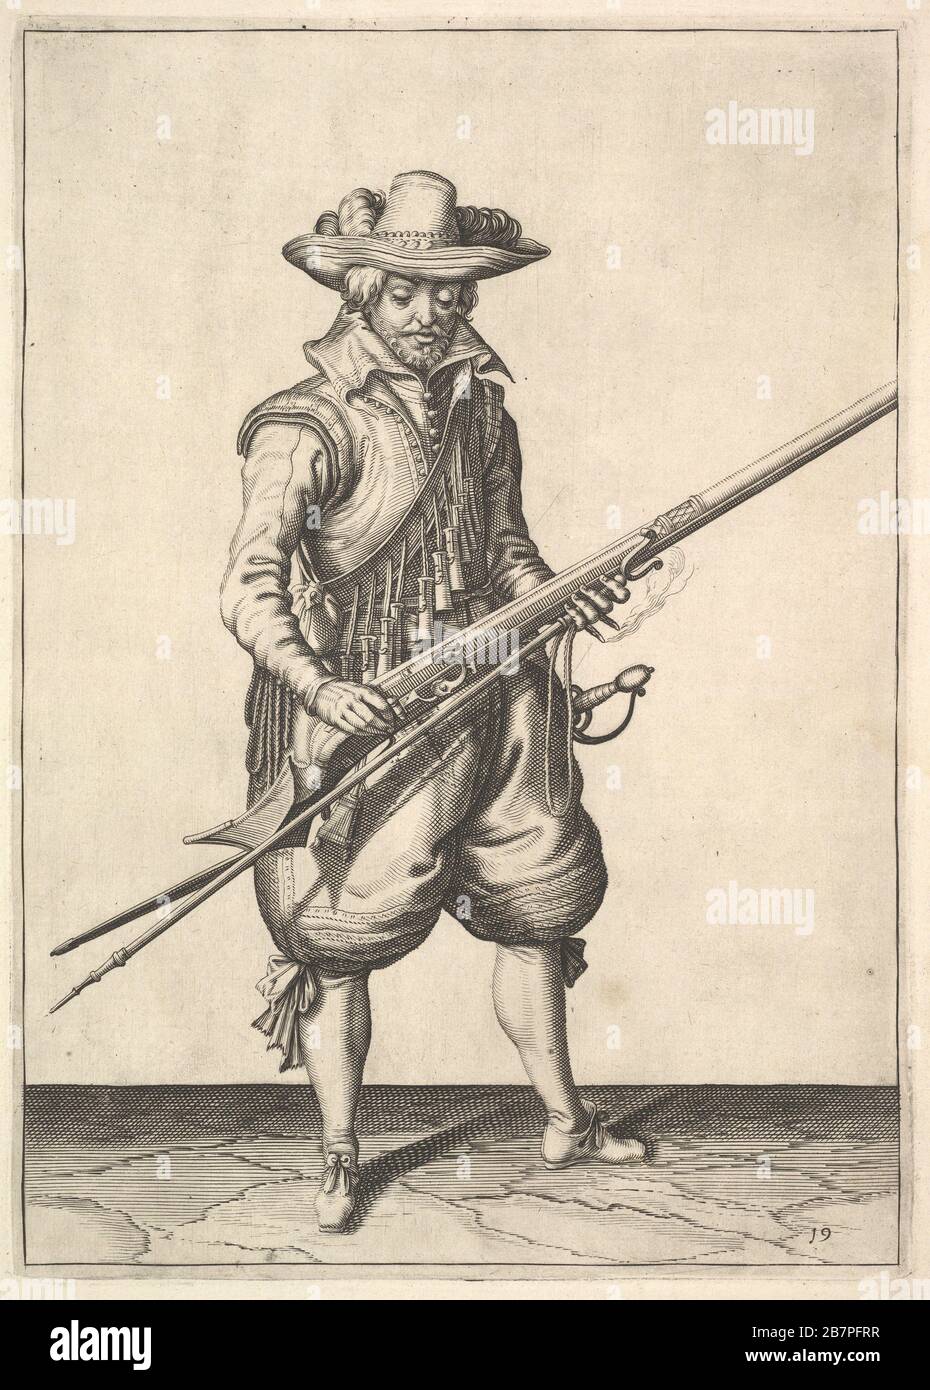 A soldier shaking the powder from the top of the pan, from the Musketeers series, plate 19, in Wapenhandelinghe van Roers Musquetten Ende Spiessen (The Exercise of Arms). Stock Photo